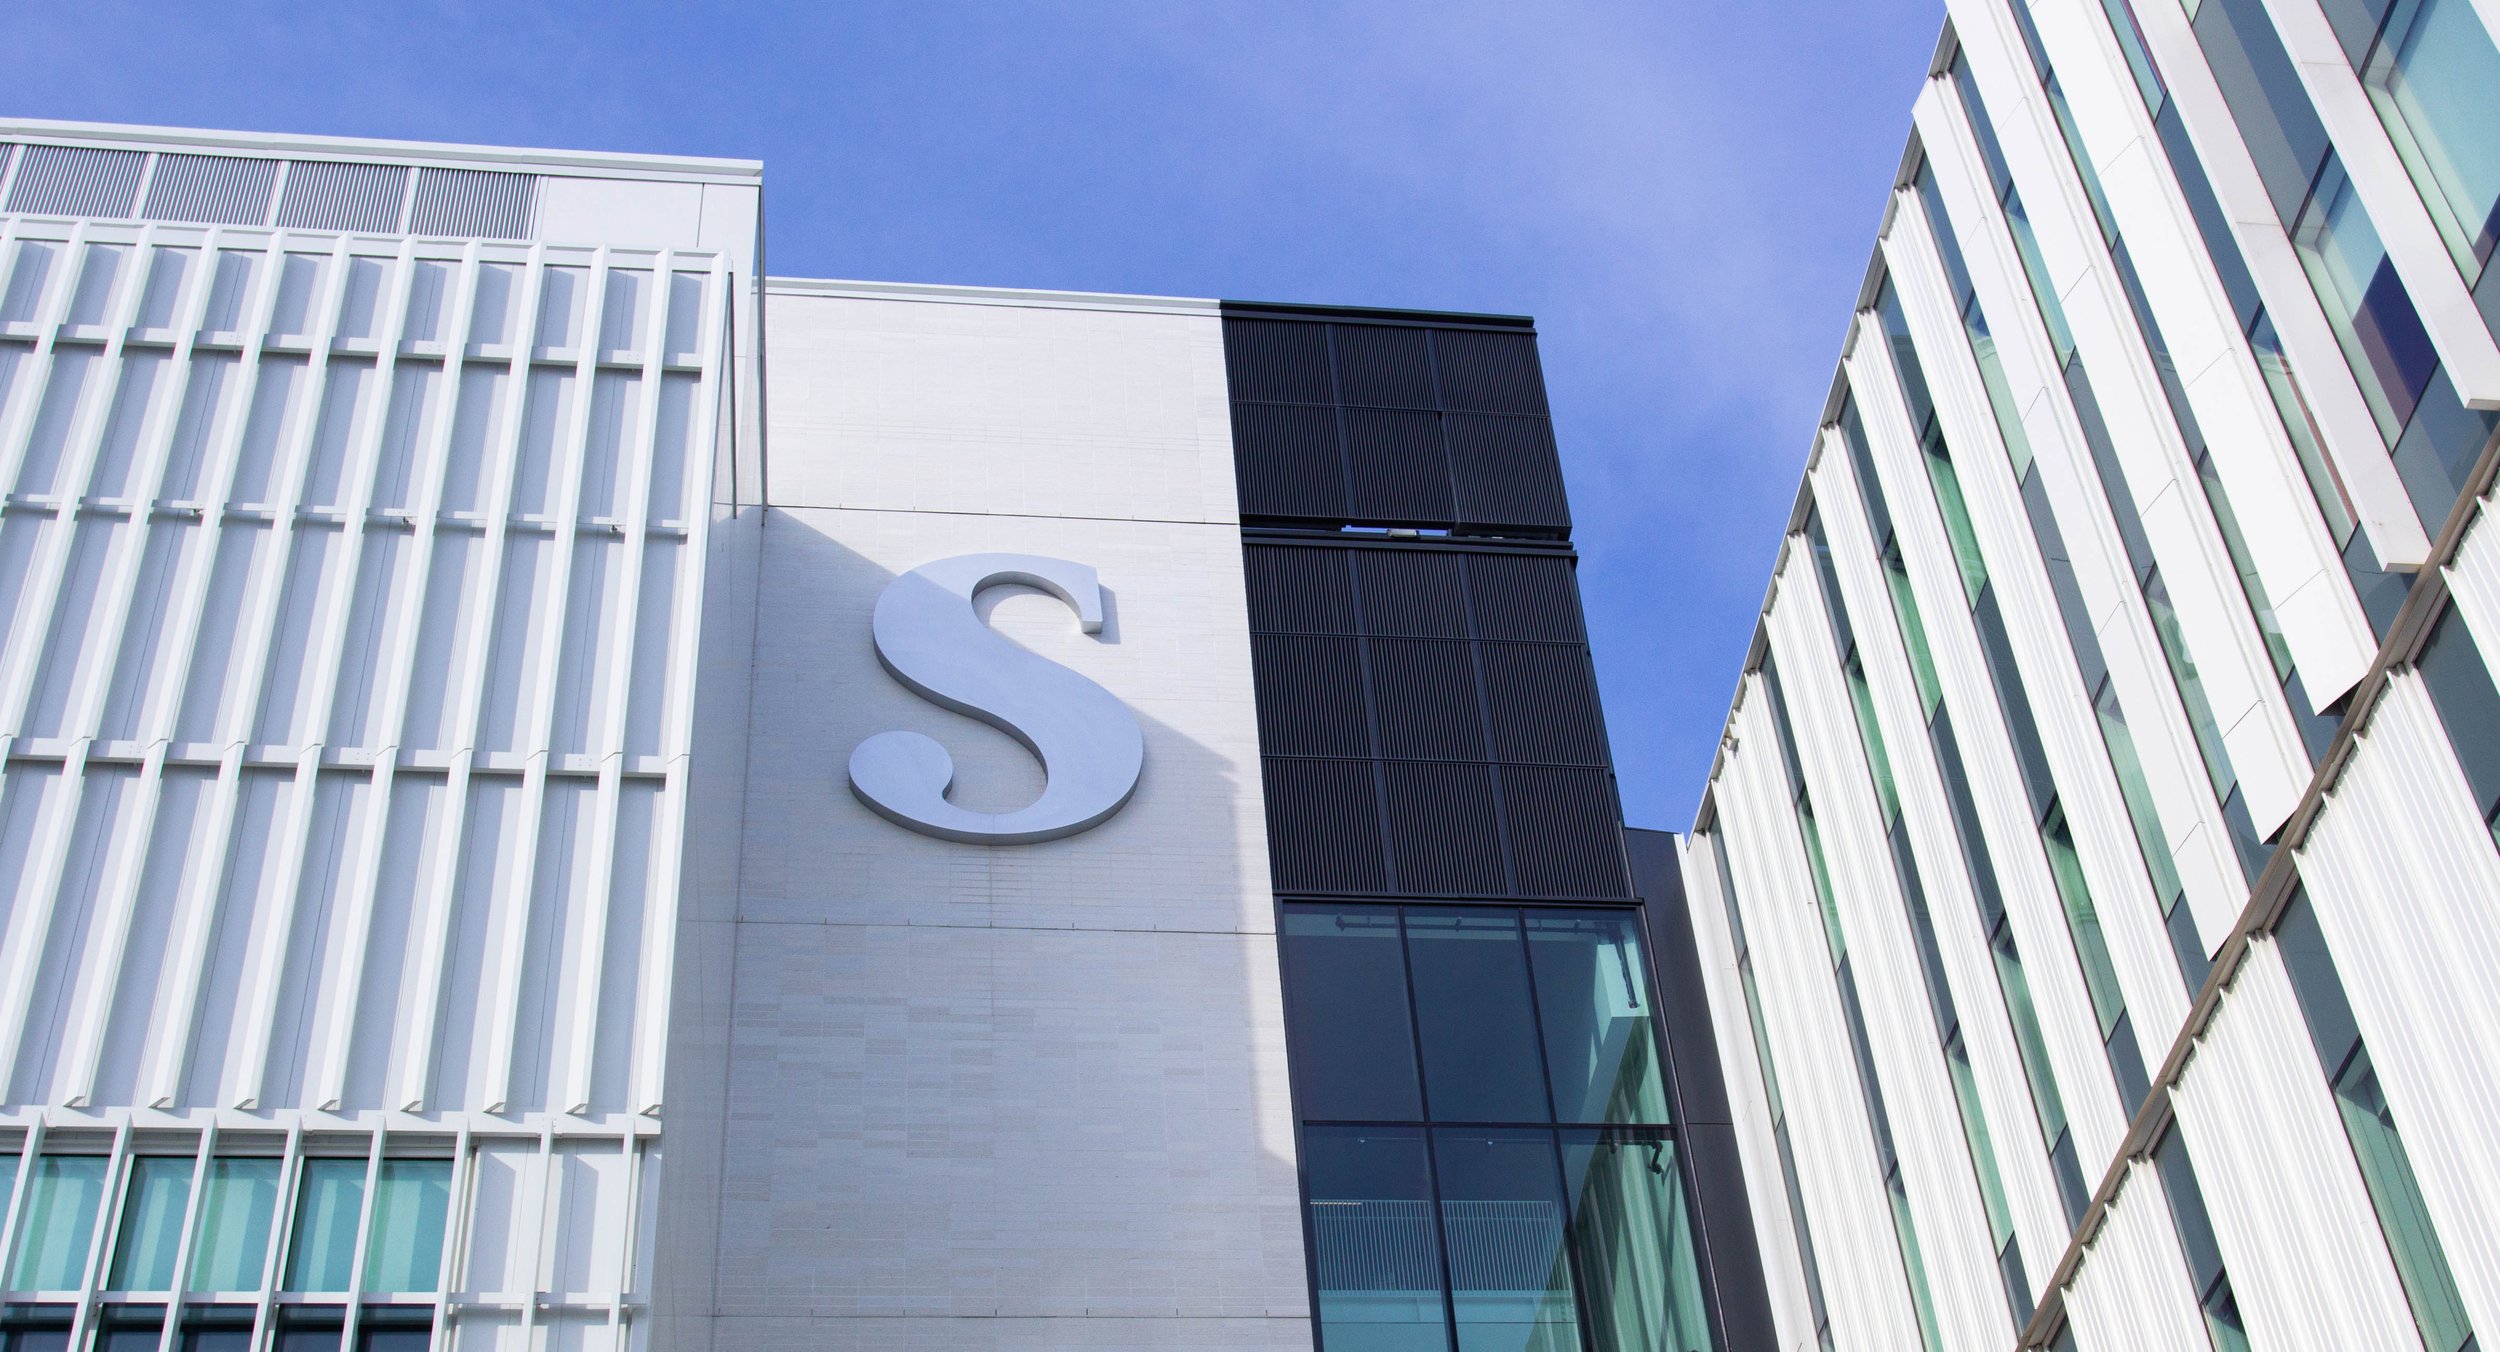  Sheridan College Hazel McCallion Student Centre, exterior view with a giant S on the front of the building.  